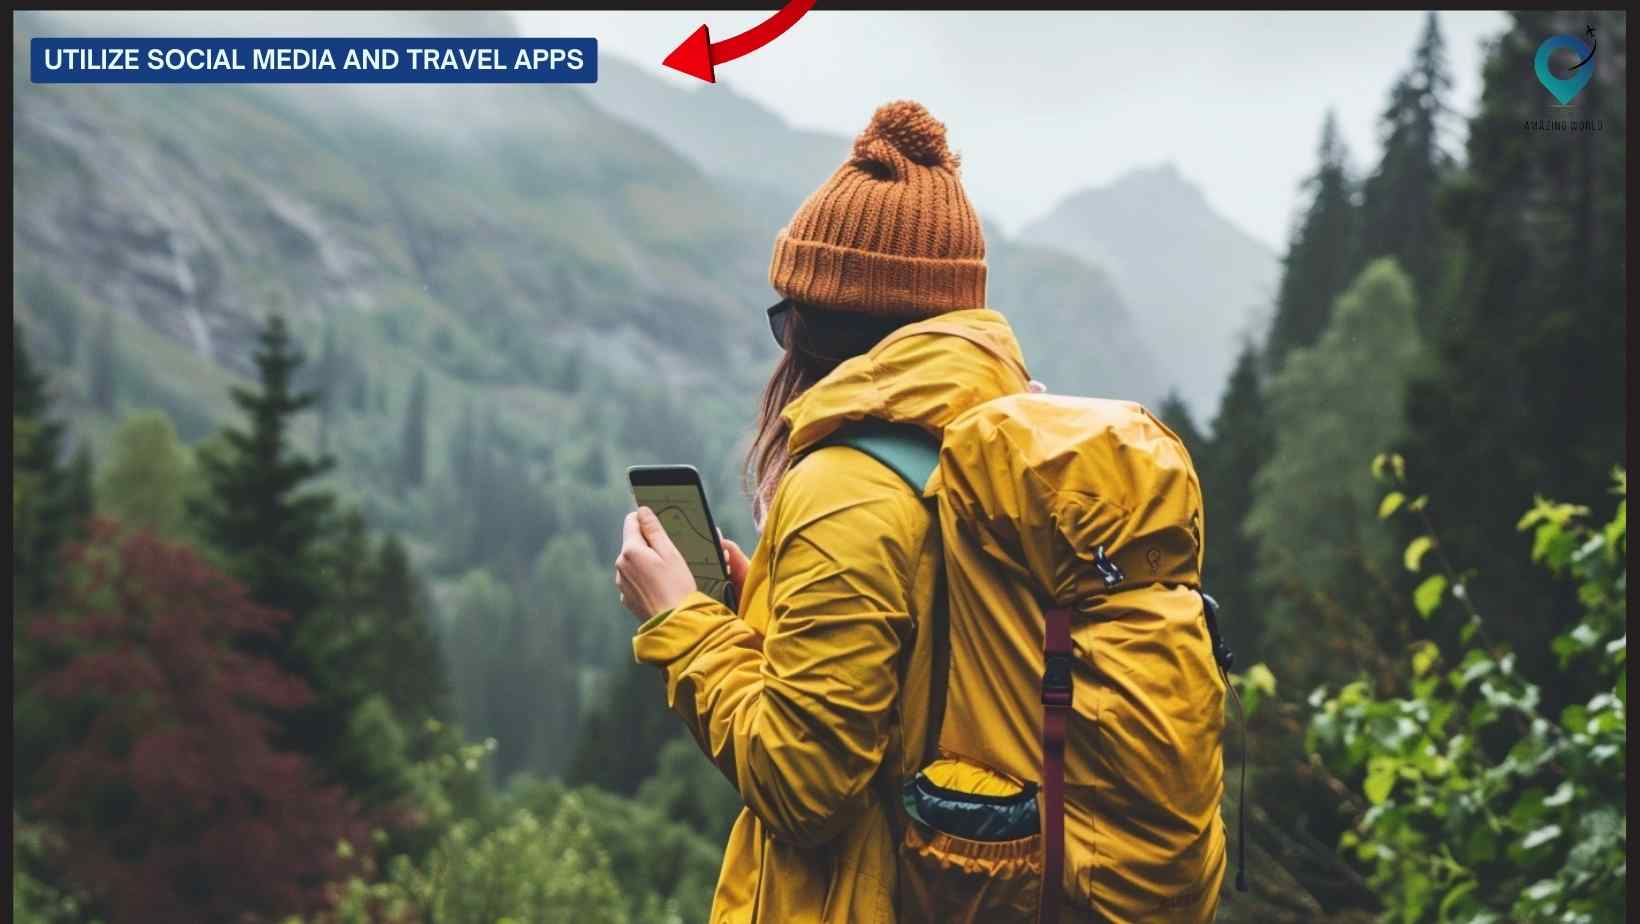 Utilize Social Media and Travel Apps